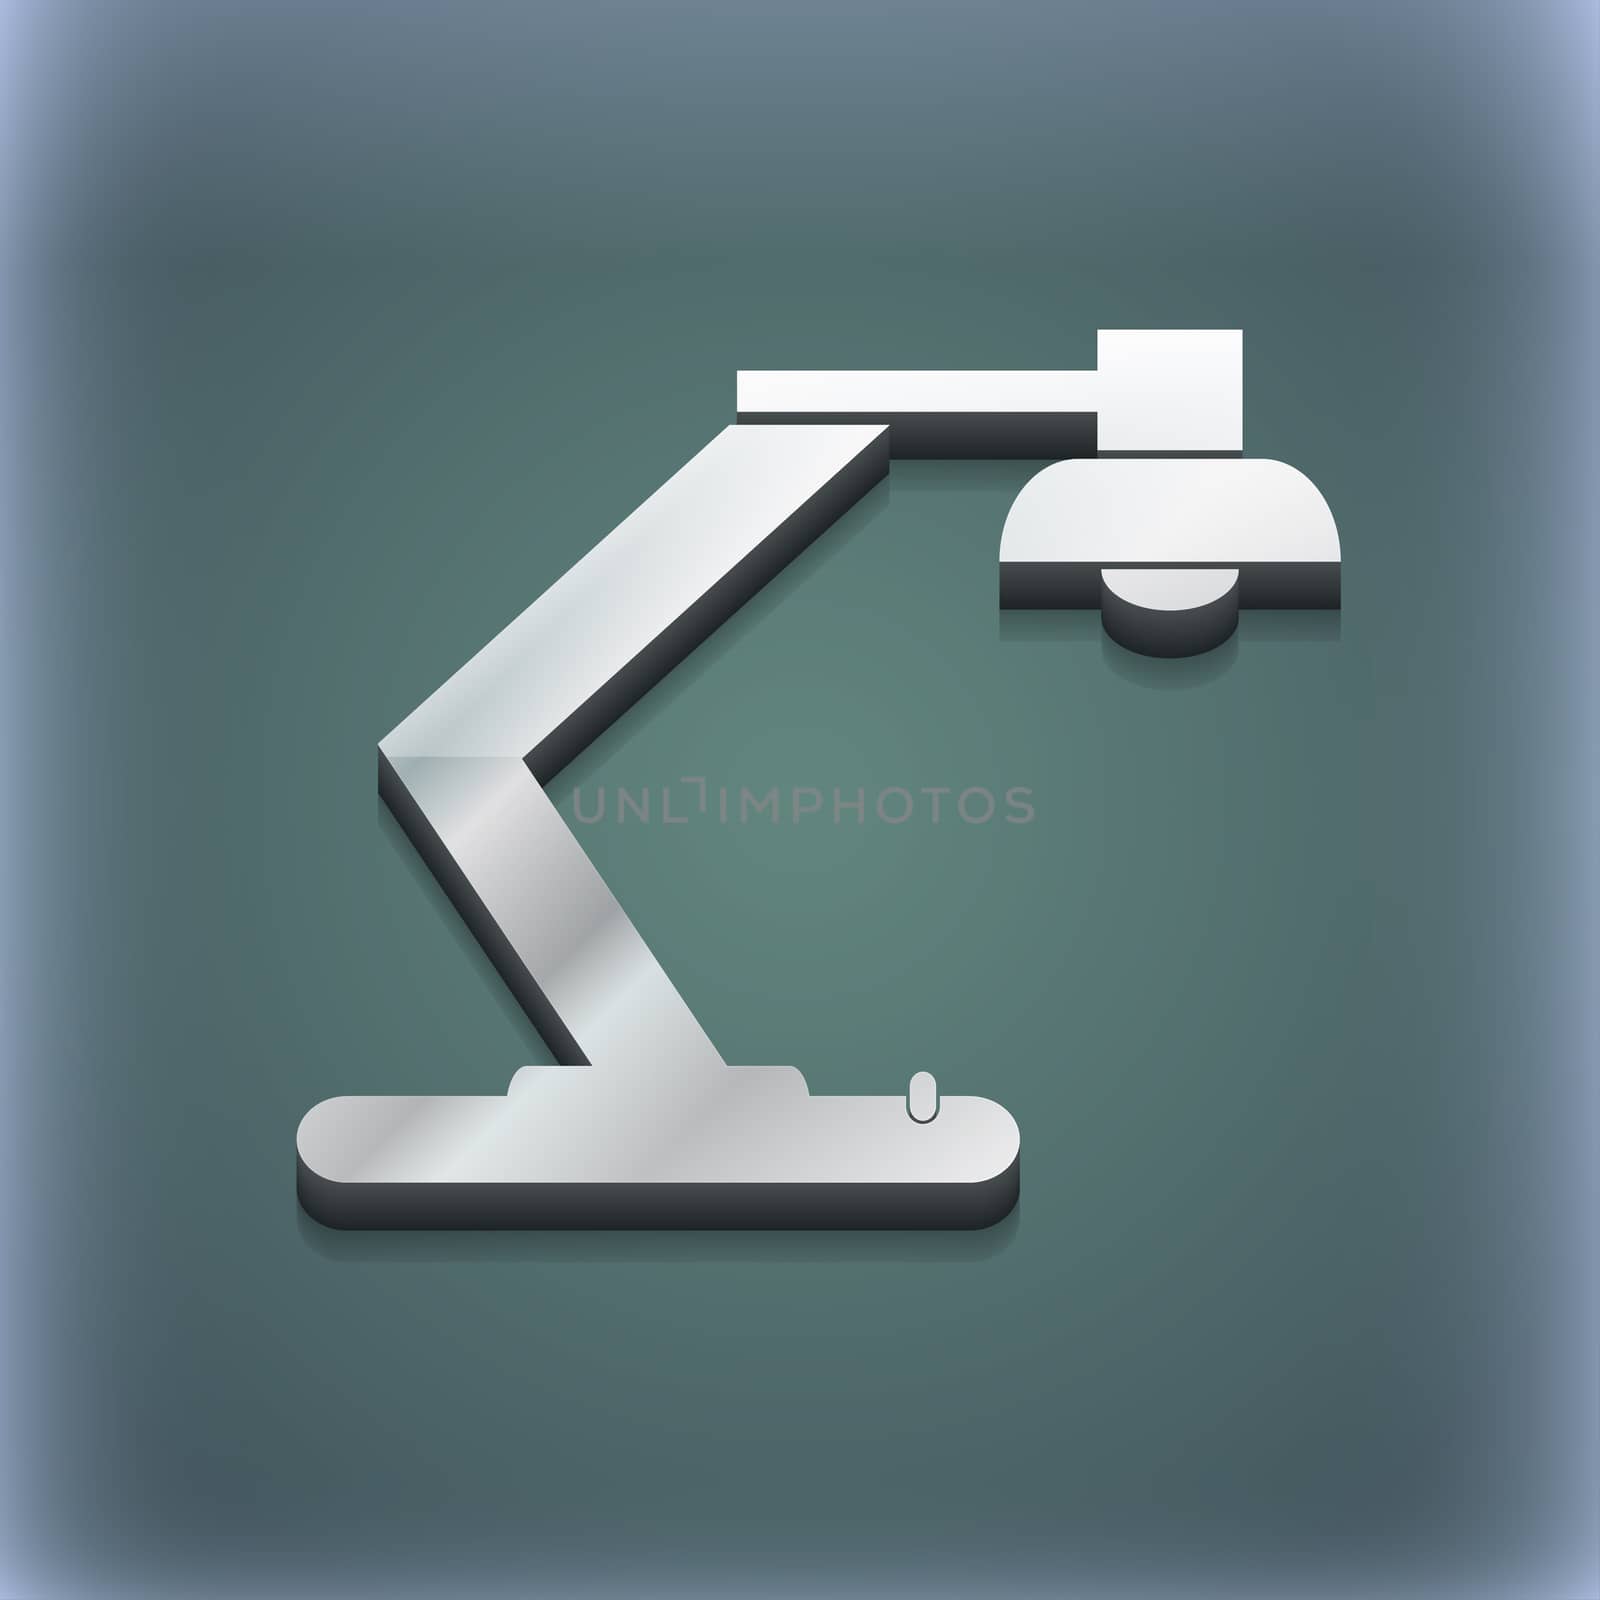 light, bulb, electricity icon symbol. 3D style. Trendy, modern design with space for your text illustration. Raster version